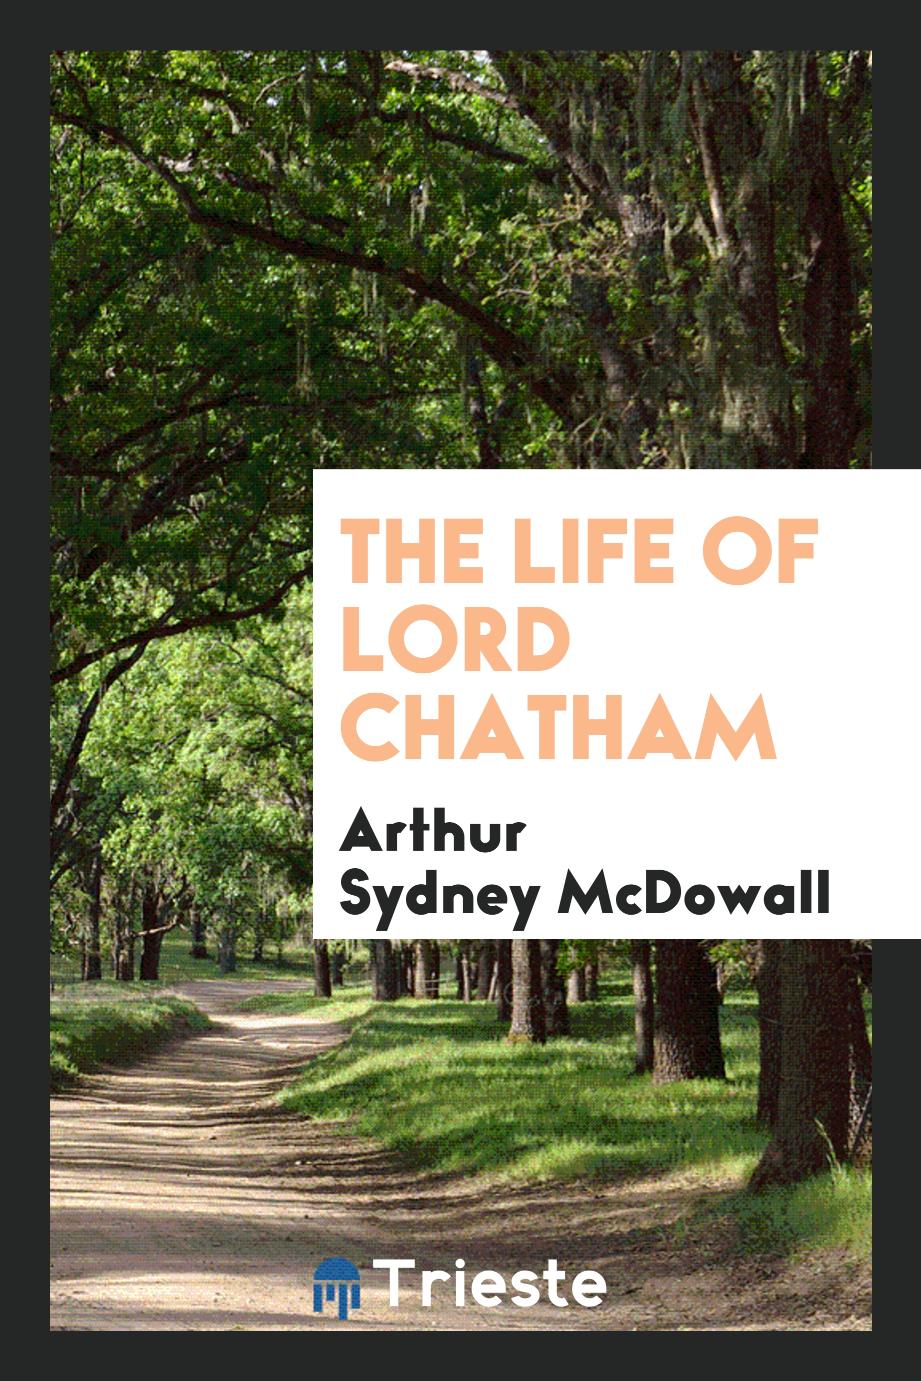 The life of Lord Chatham